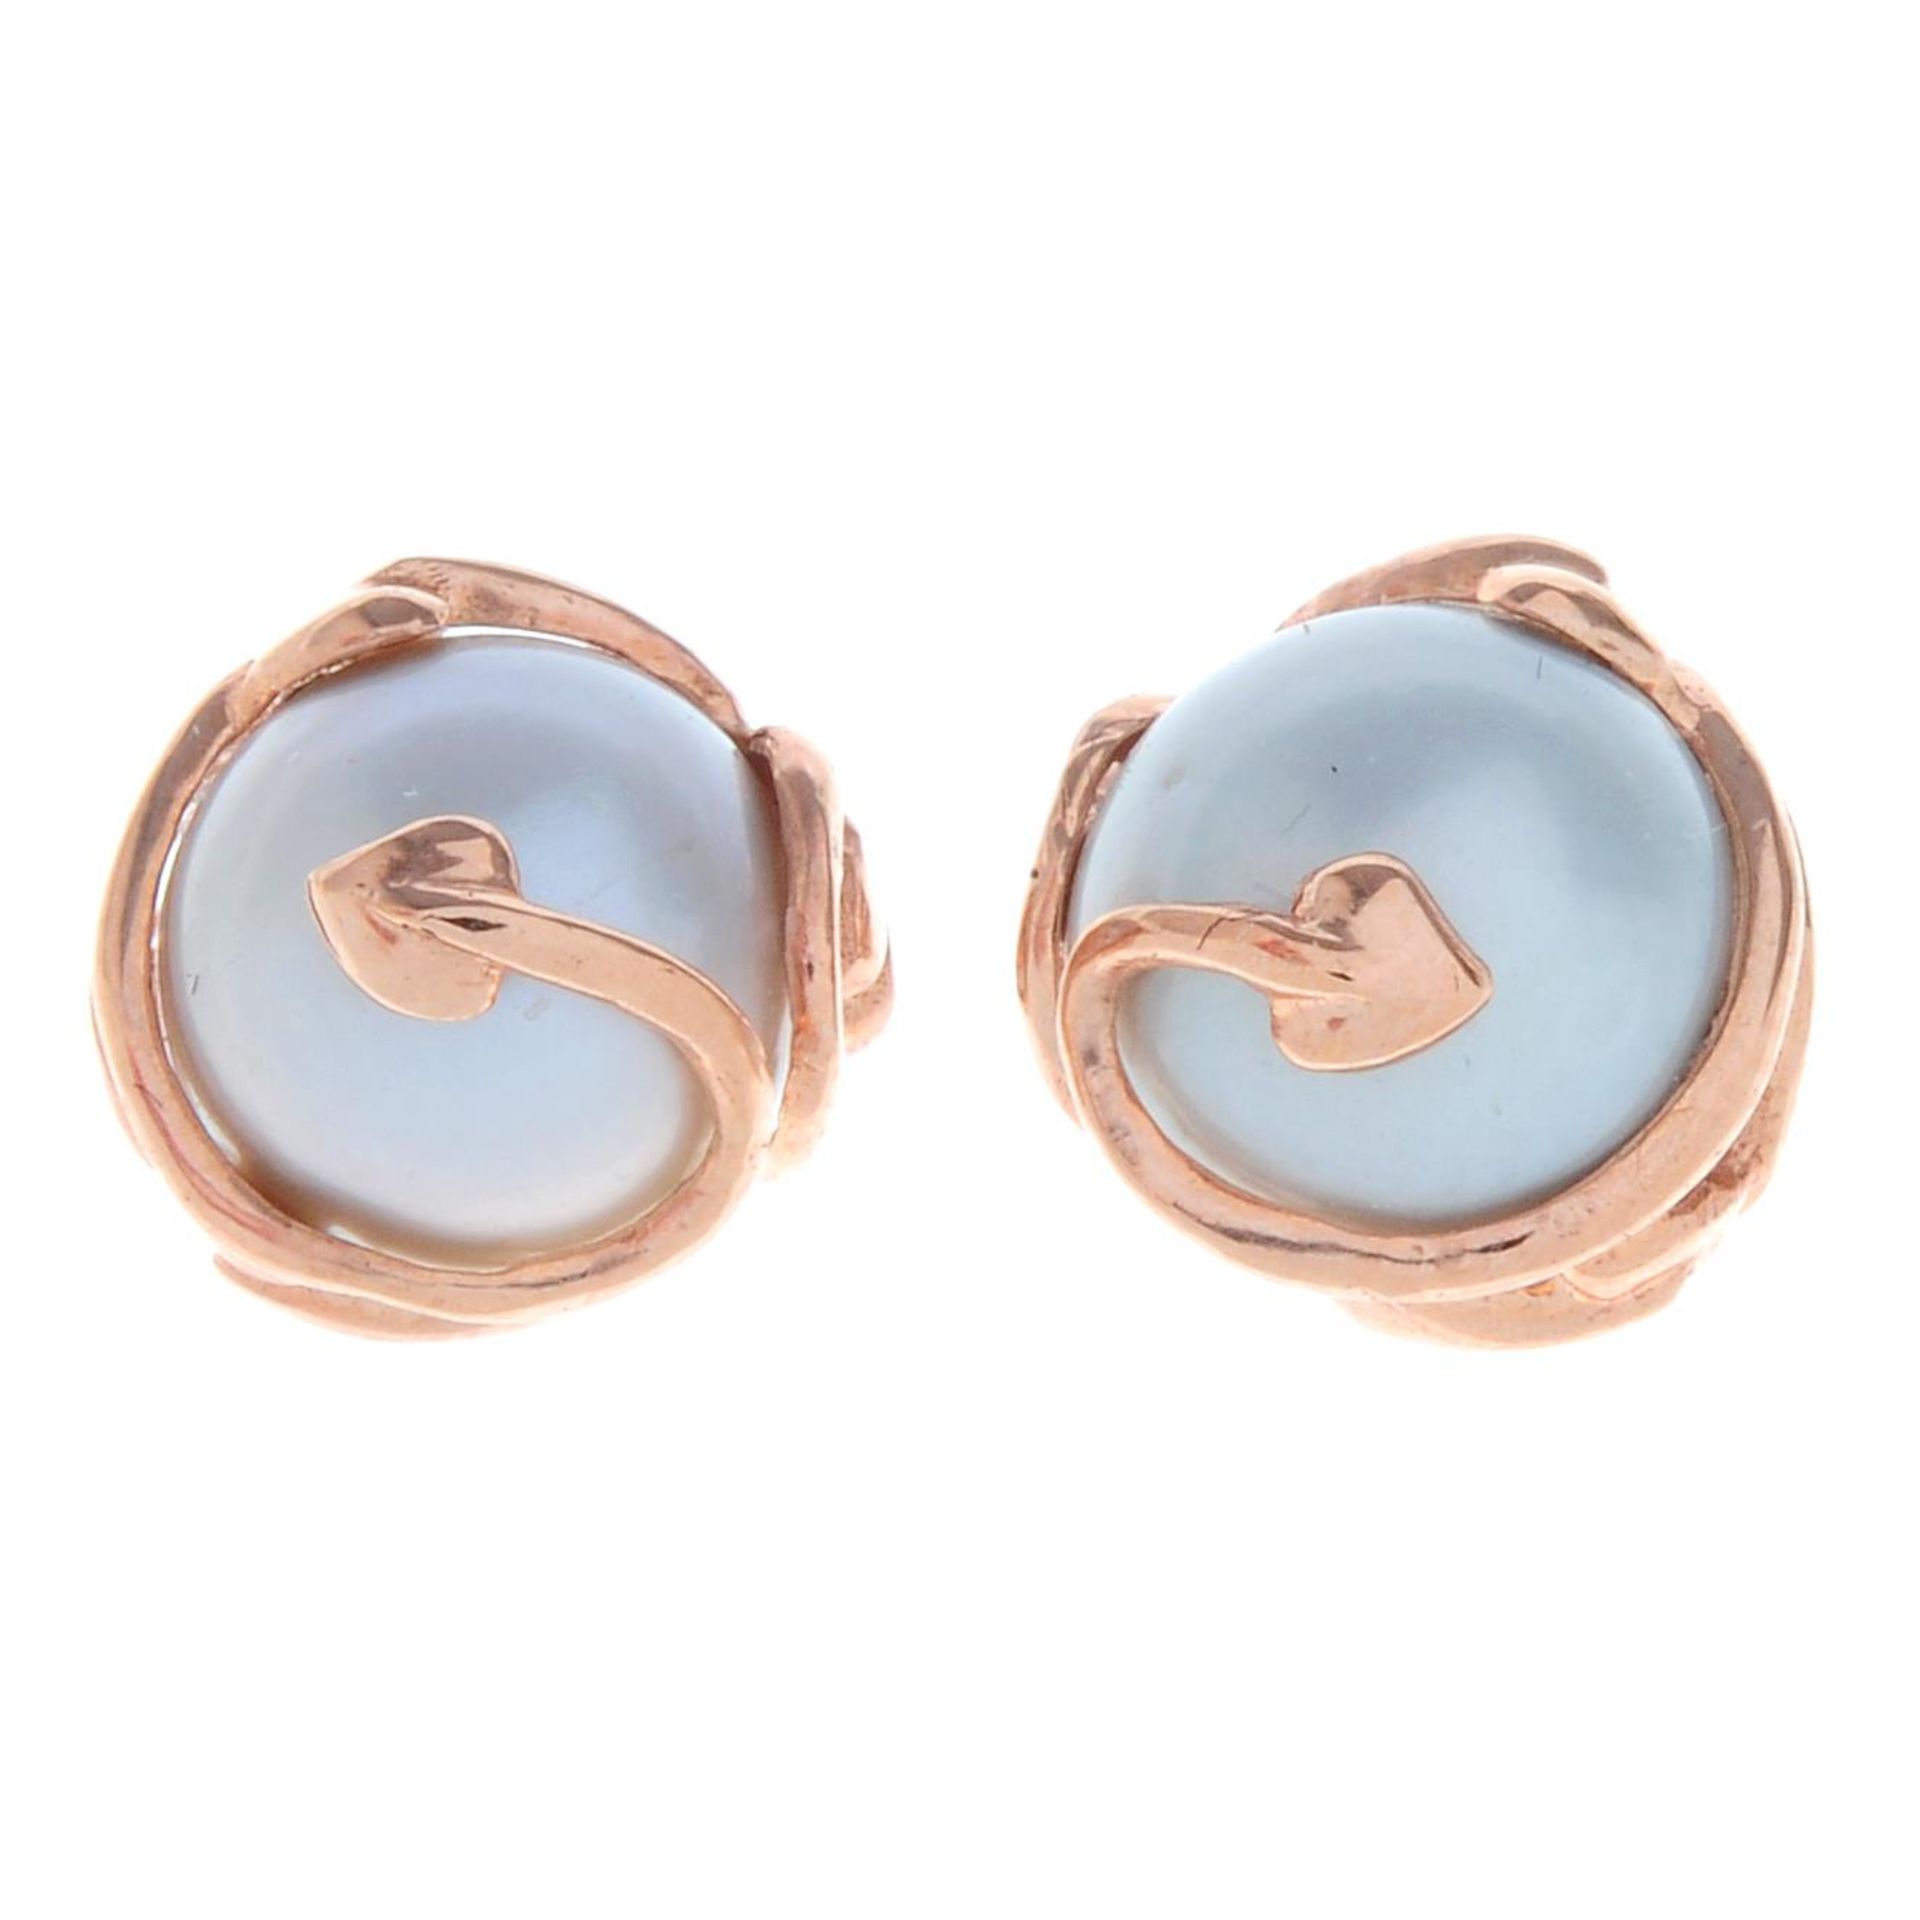 A pair of 9ct gold 'Tree of Life' cultured pearl stud earrings, by Clogau.Signed Clogau.